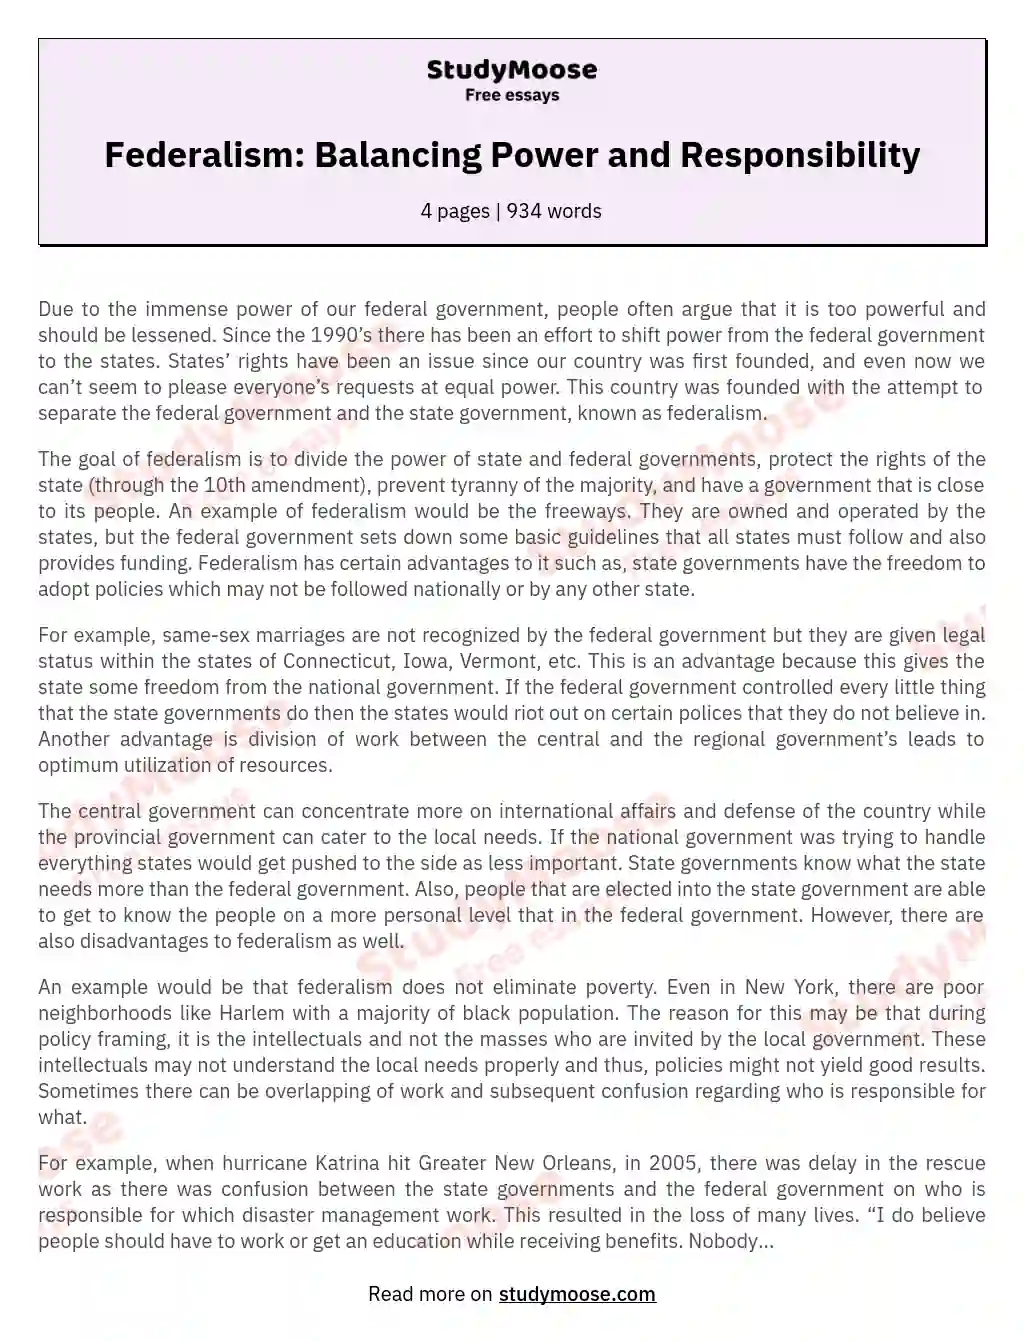 Federalism: Balancing Power and Responsibility essay